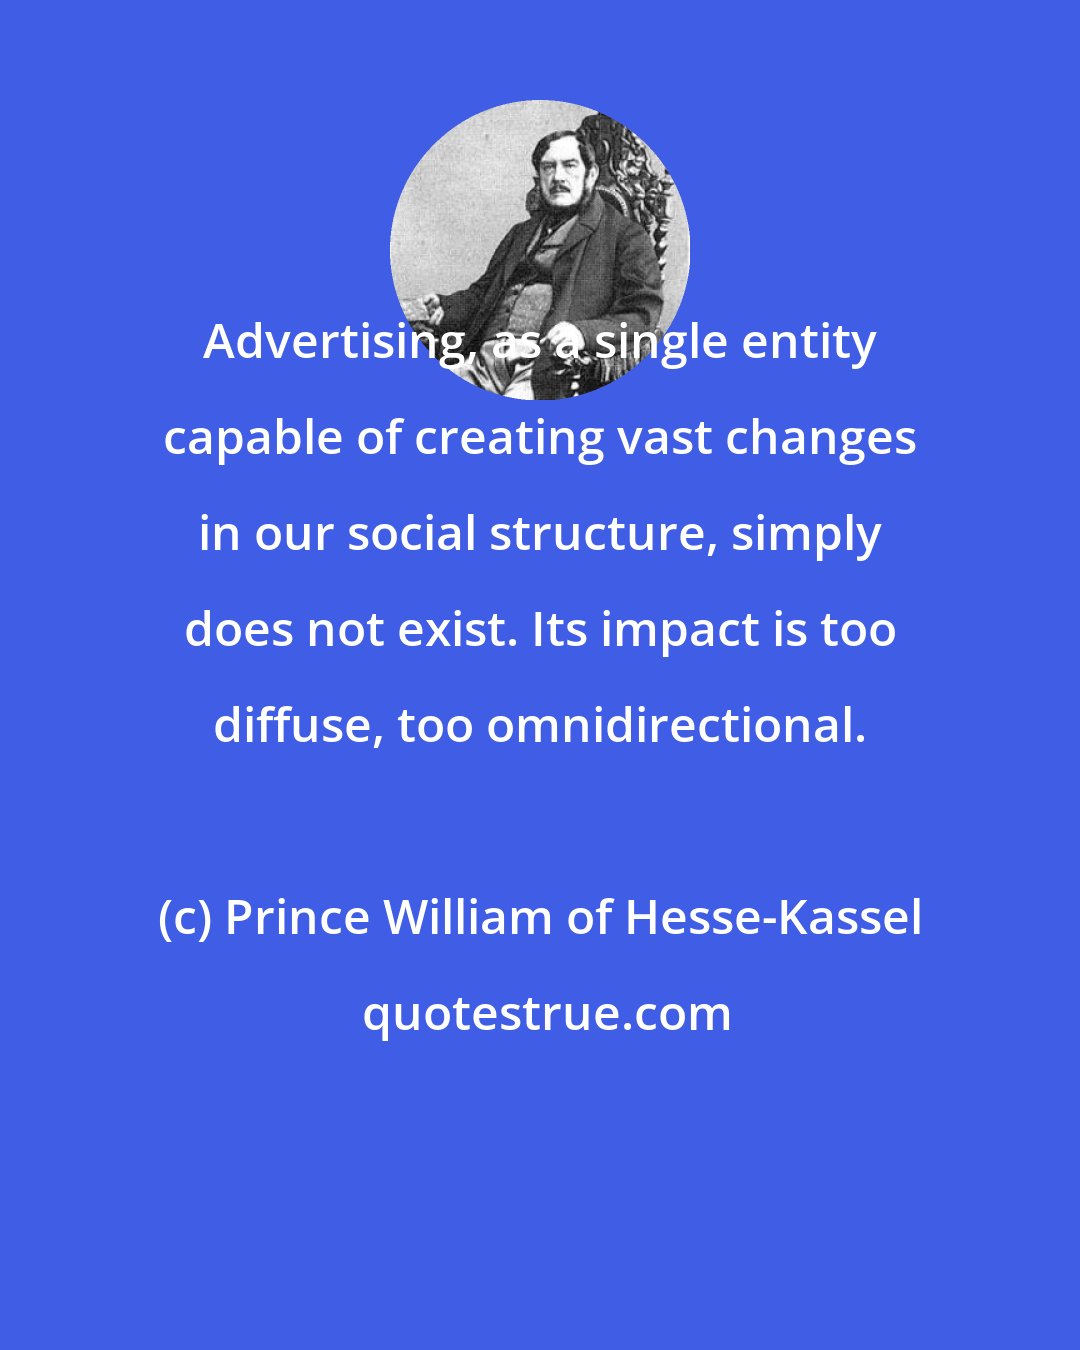 Prince William of Hesse-Kassel: Advertising, as a single entity capable of creating vast changes in our social structure, simply does not exist. Its impact is too diffuse, too omnidirectional.